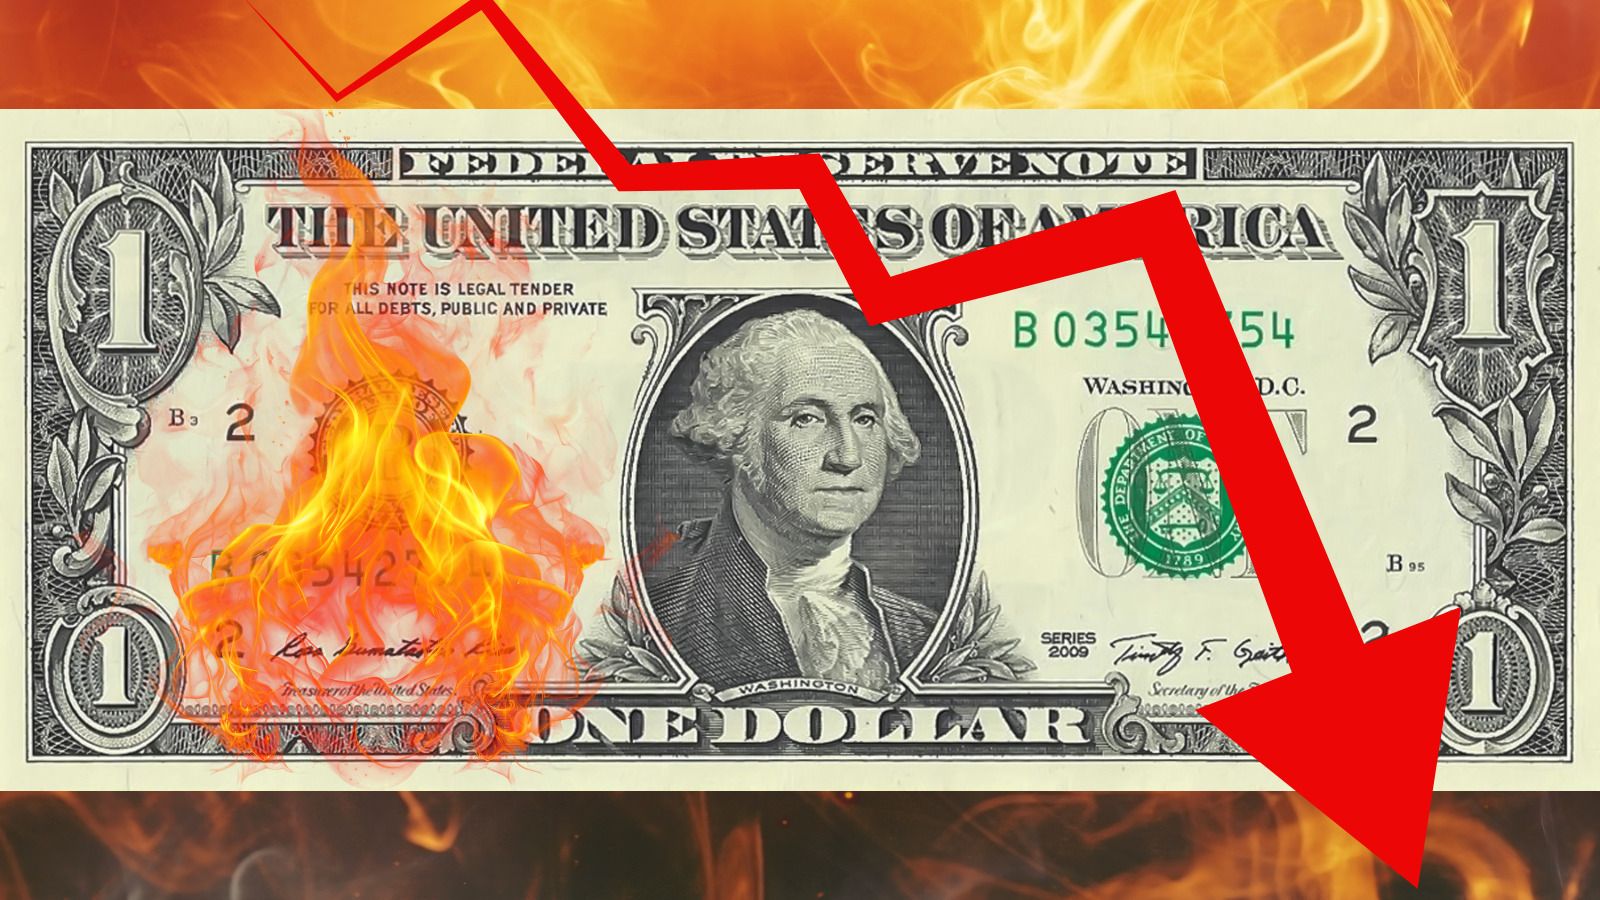 A MASSIVE financial collapse is coming that will destroy everyone’s assets, warns Paul Craig Roberts